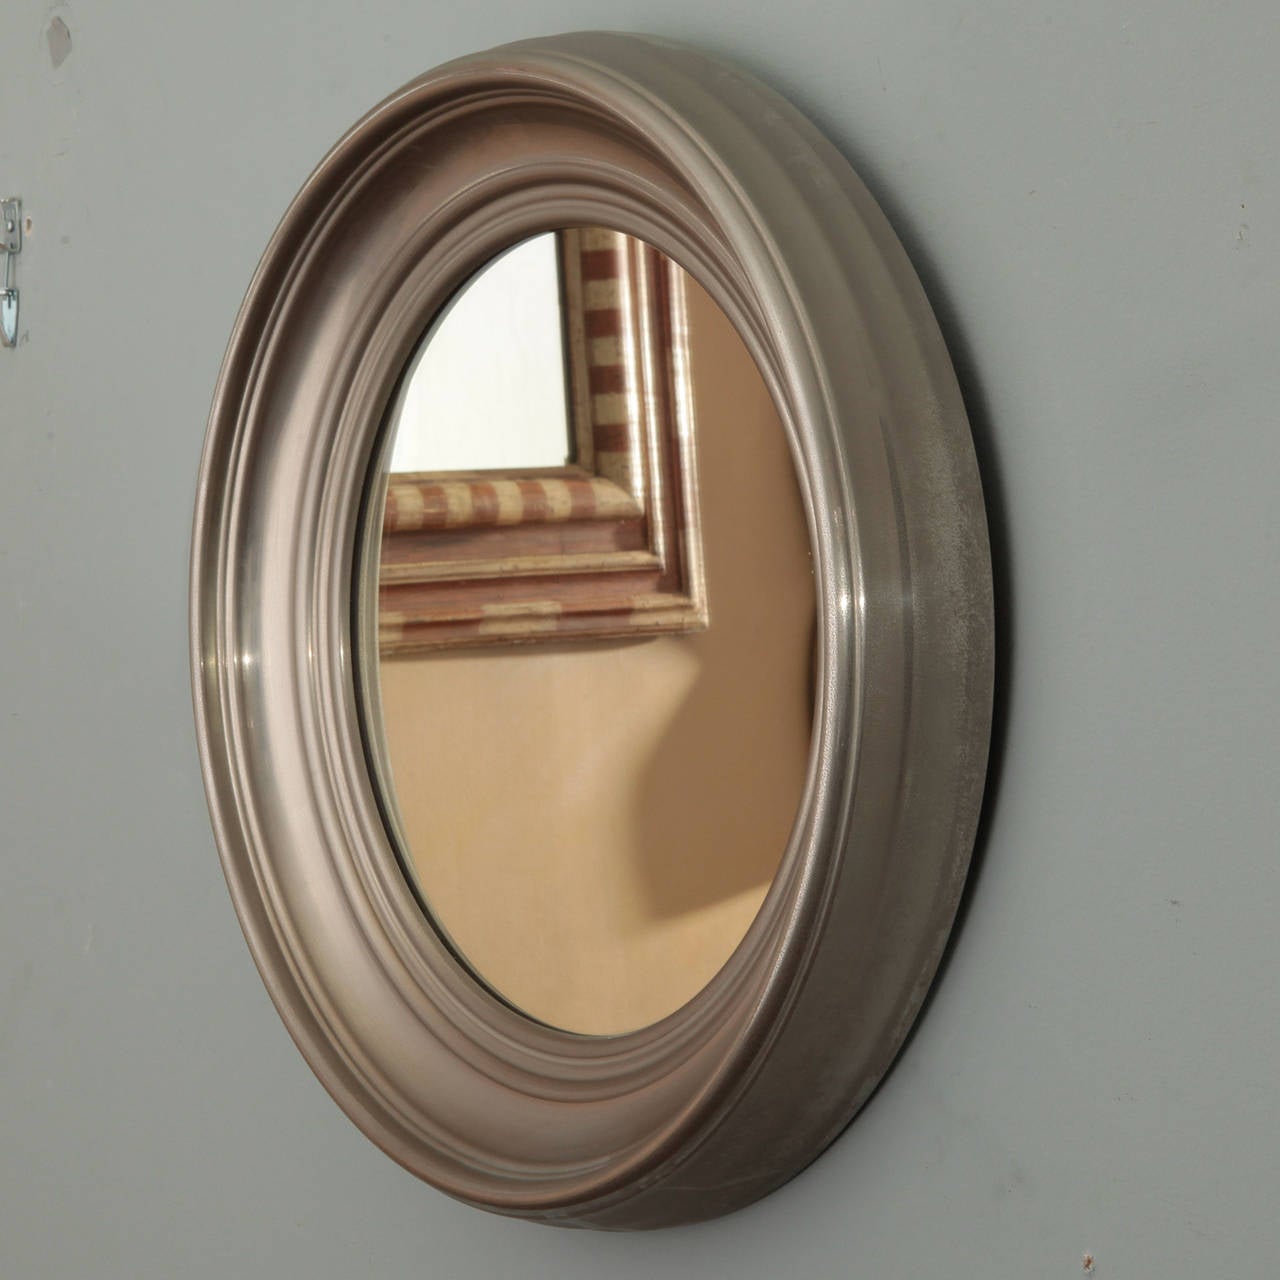 Found in France, this circa 1930s round mirror has a deep, silver tone metal frame.